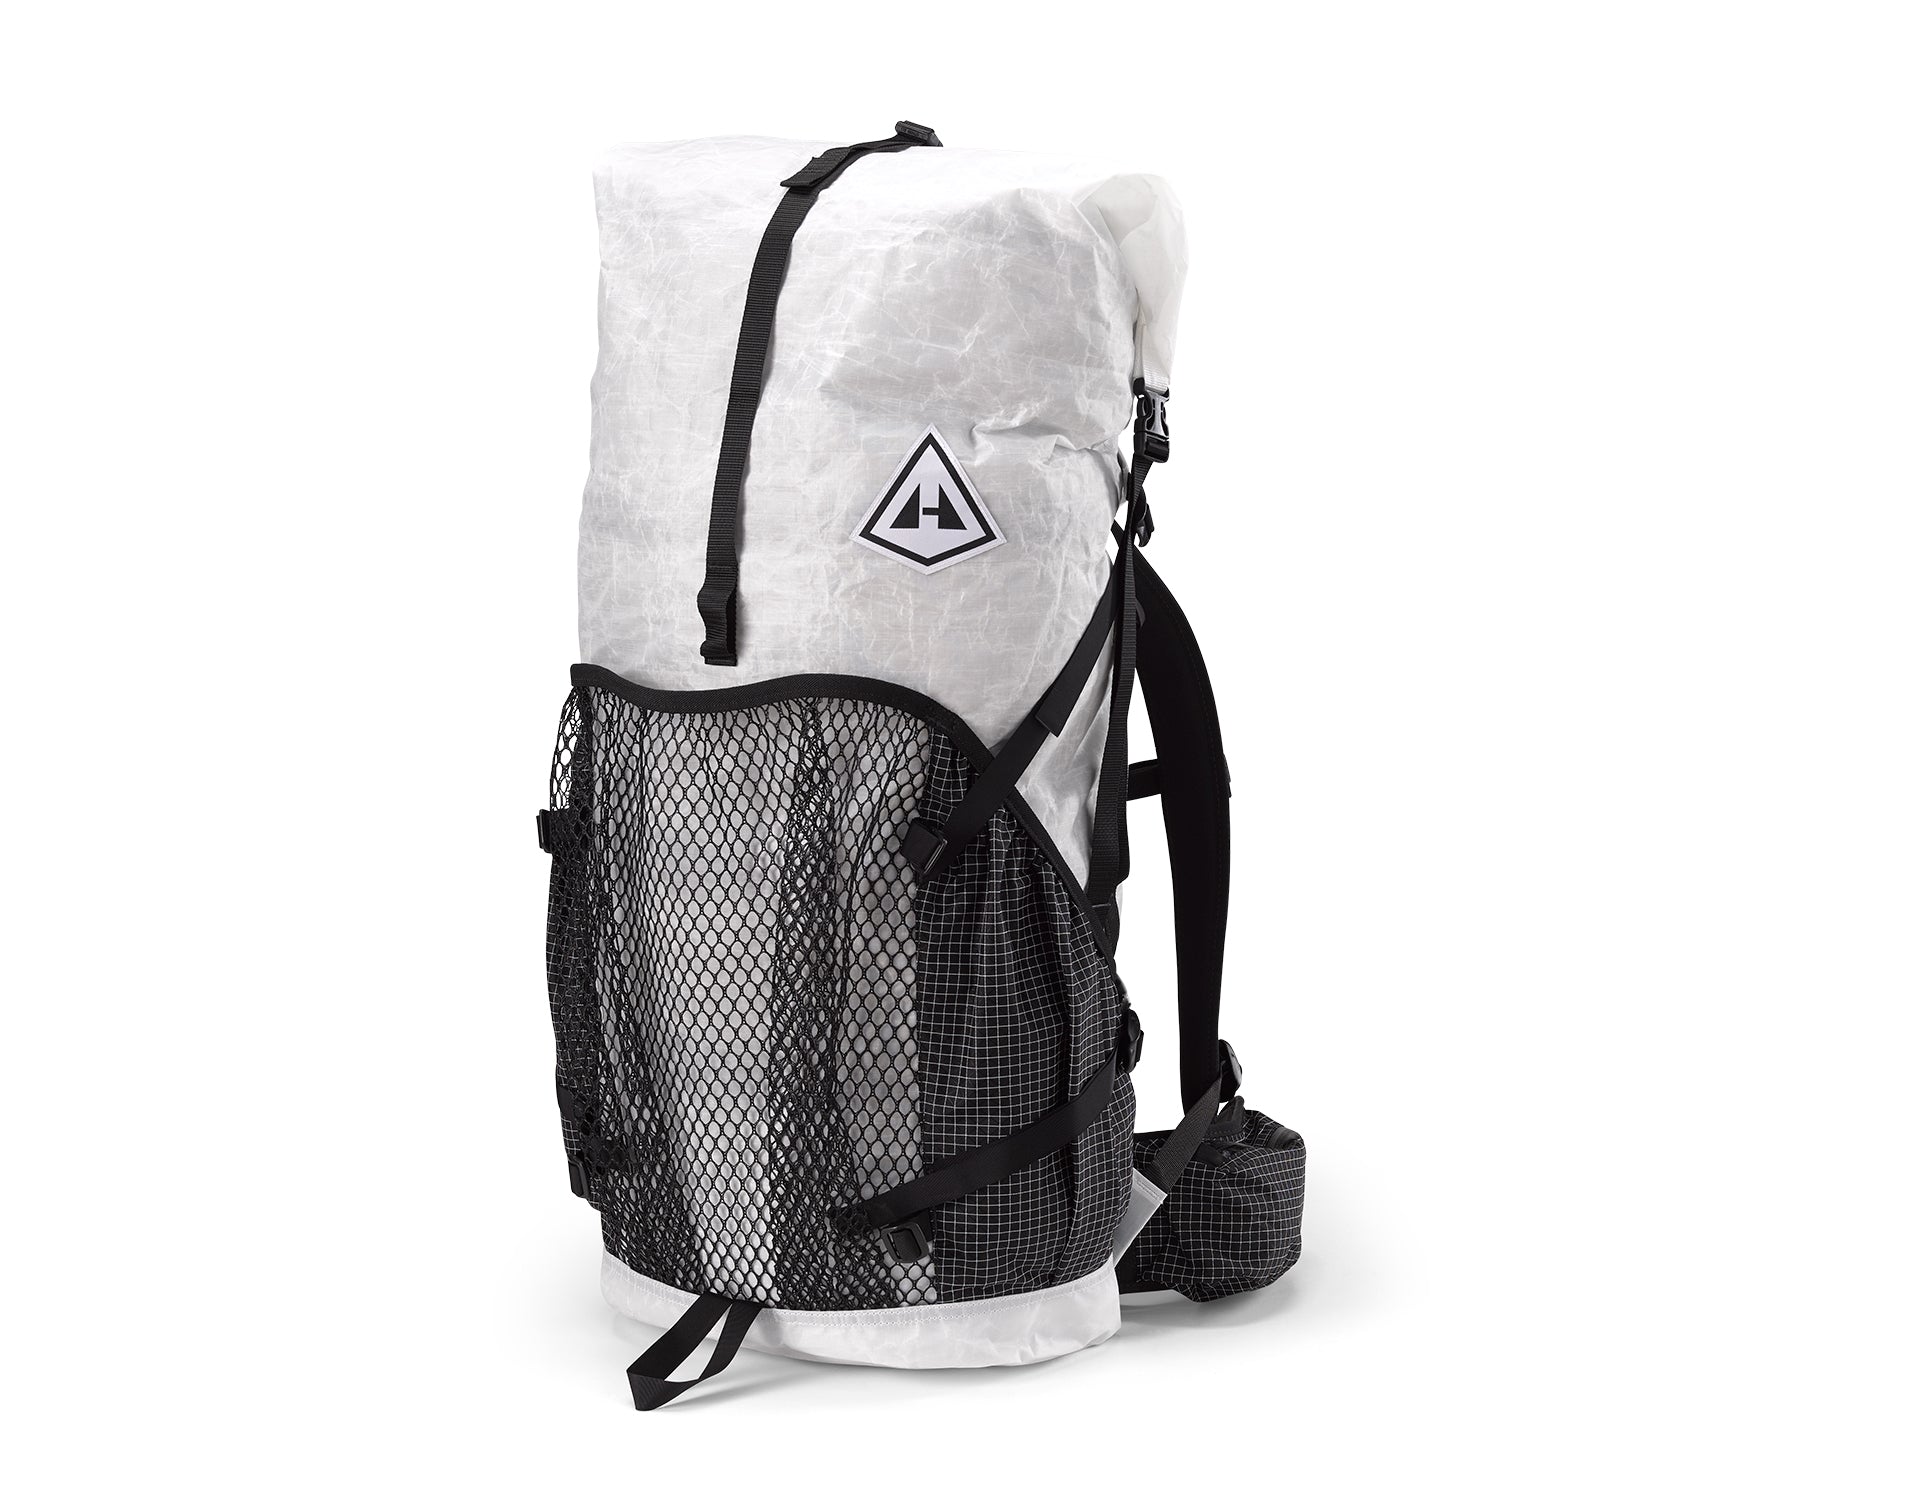 A white and black backpack on a white background.